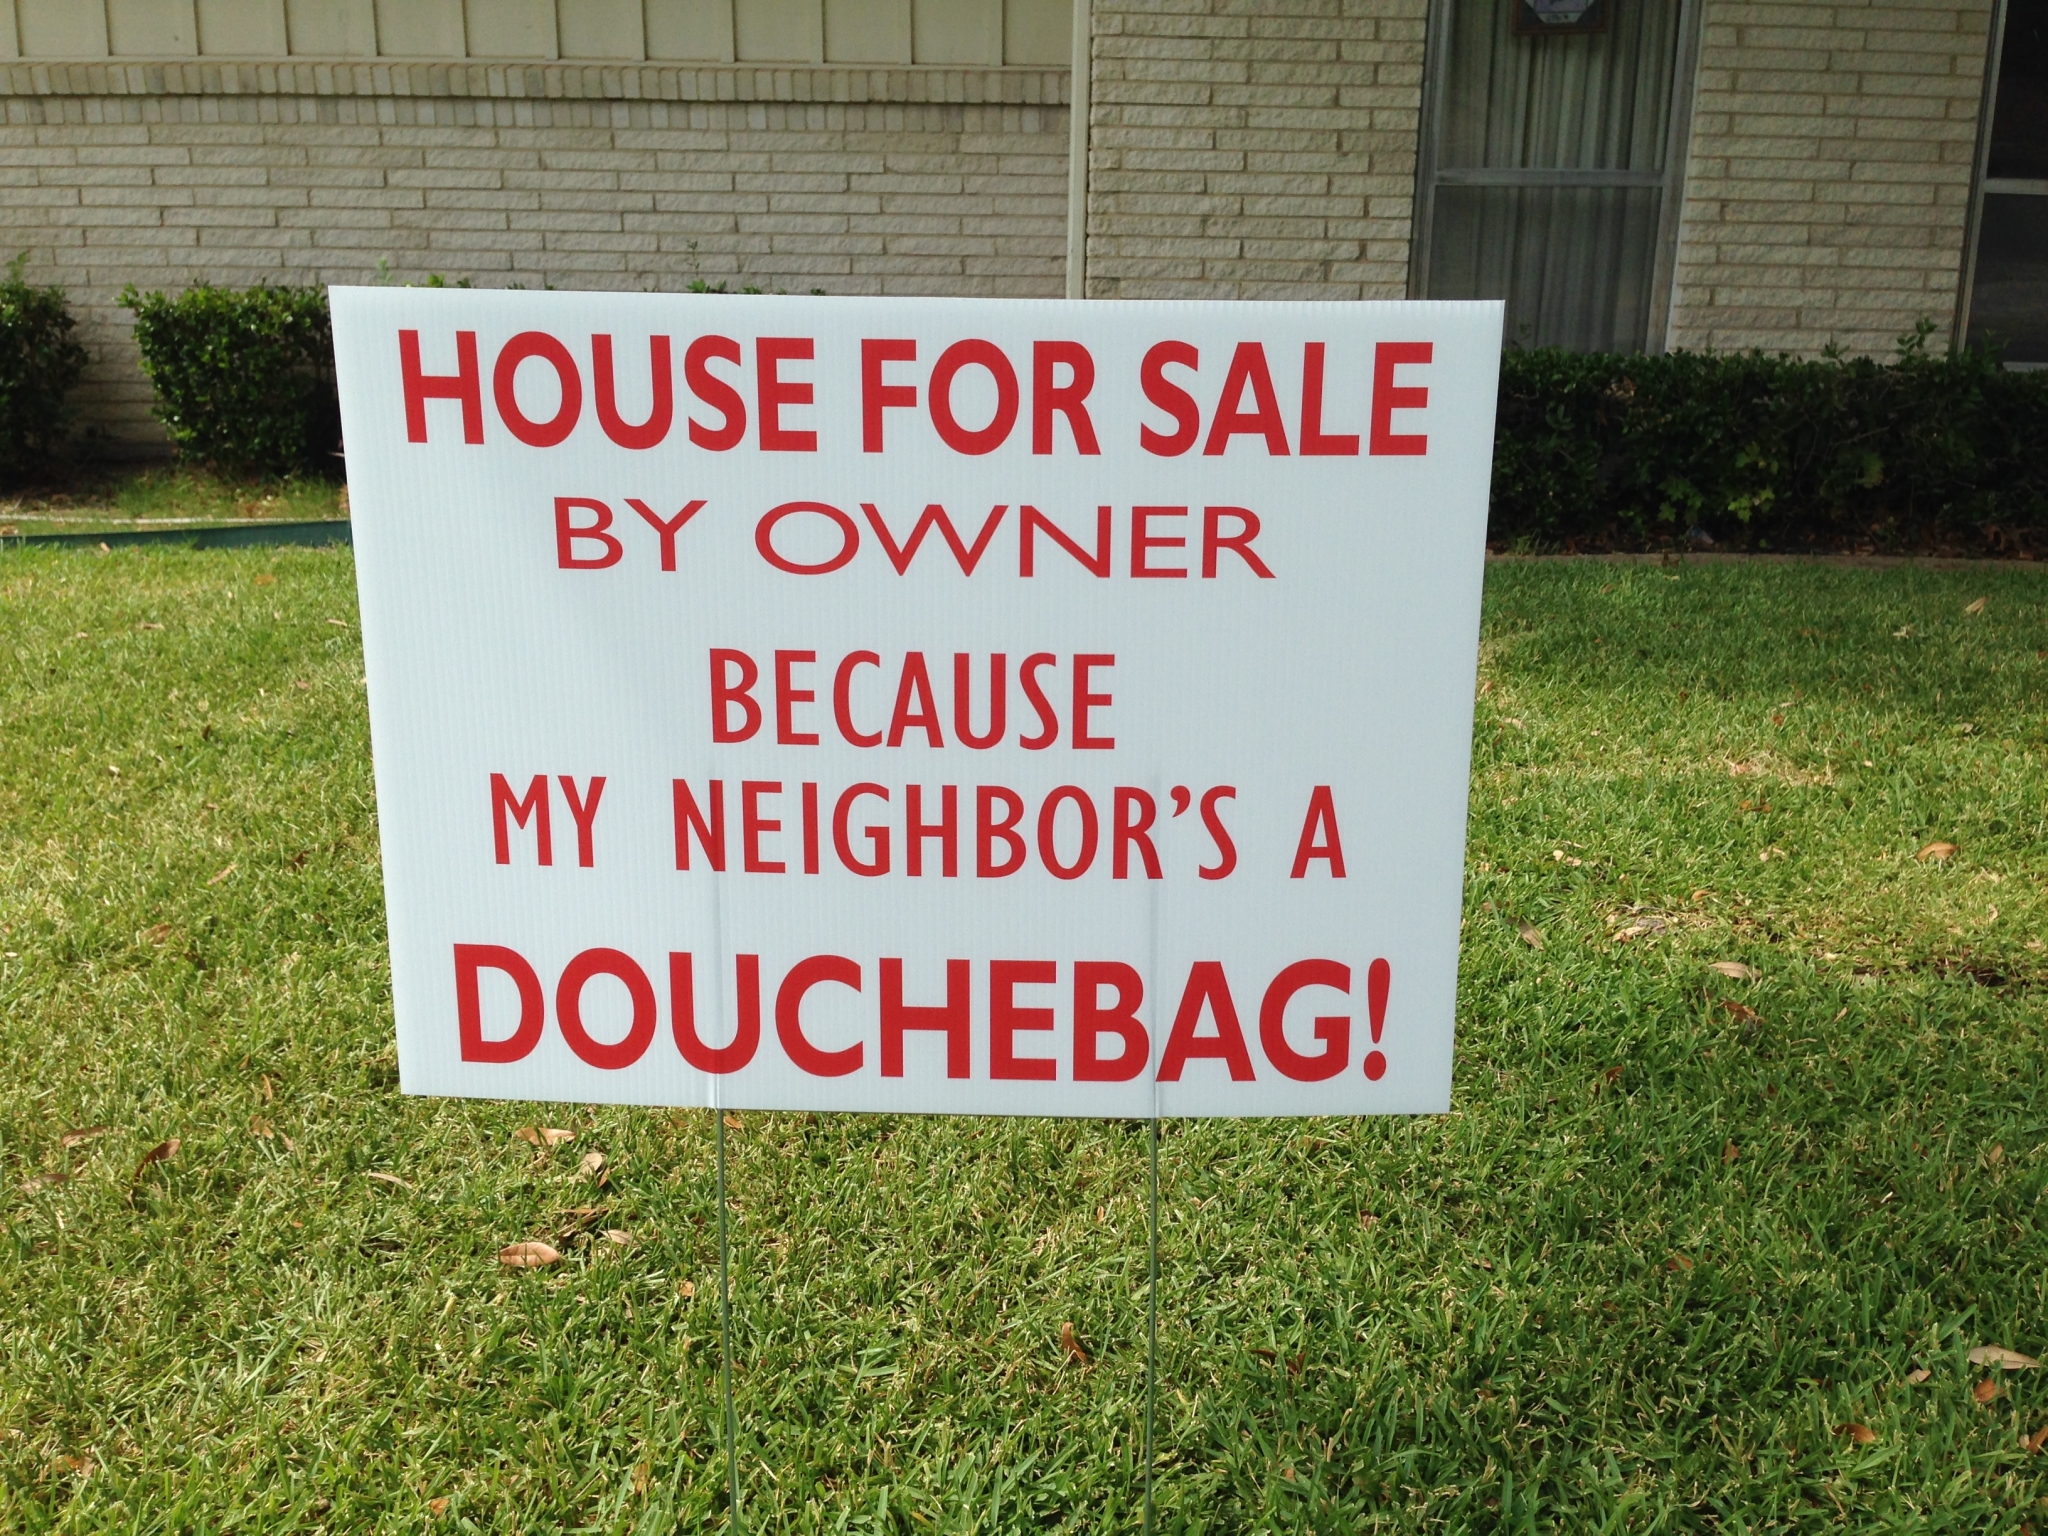 'House for sale by owner because my neighbor's a douchebag' sign raises